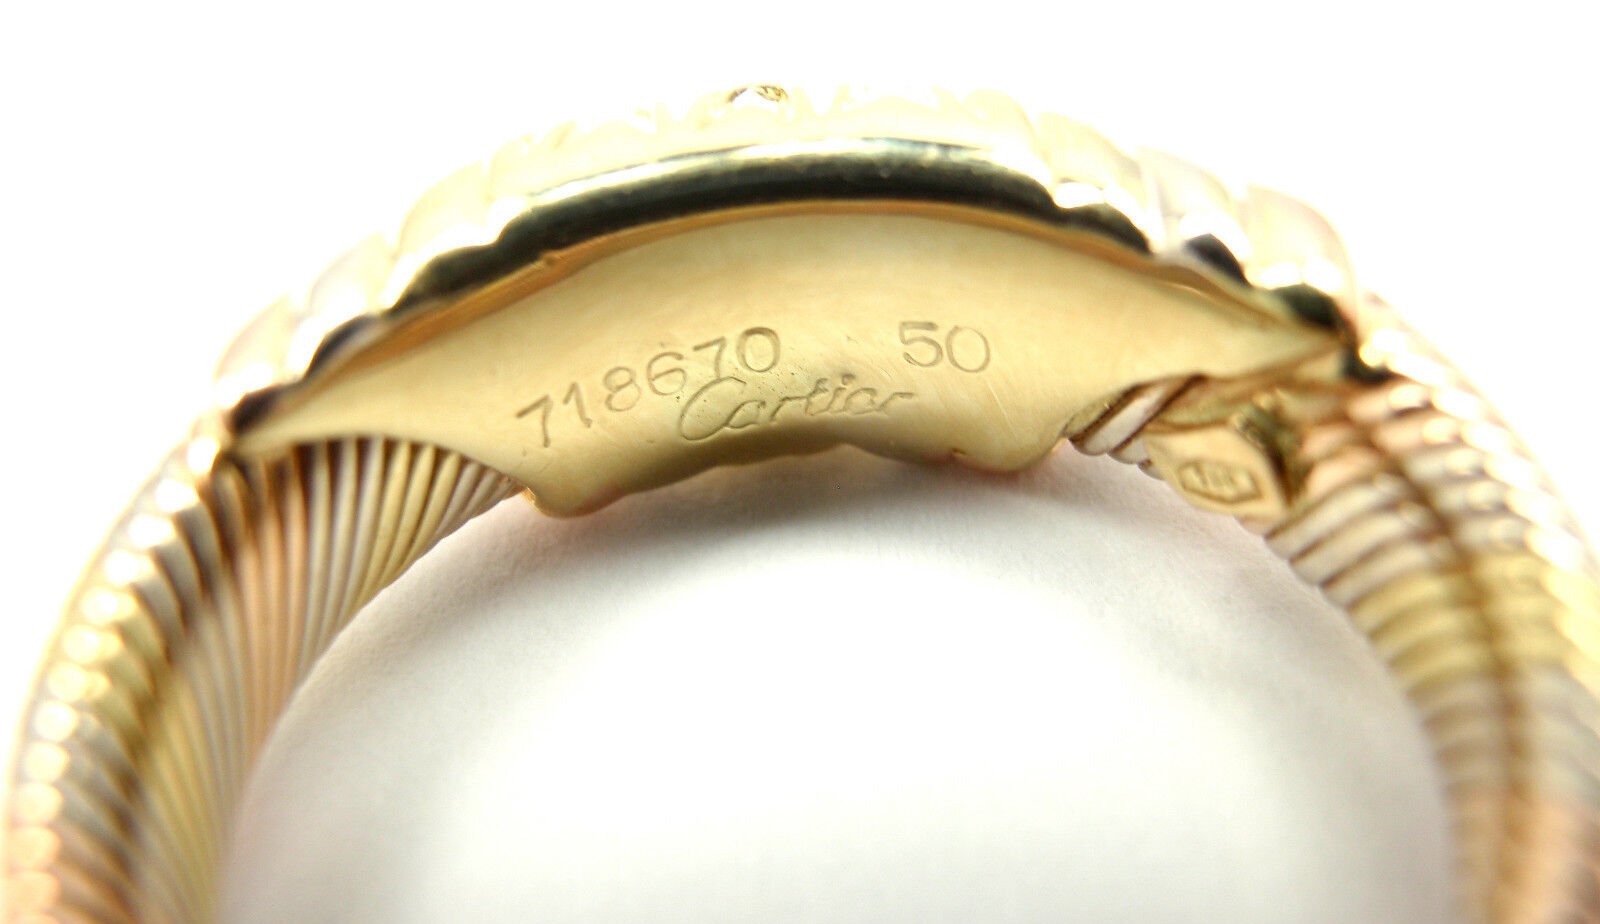 Cartier Jewelry & Watches:Fine Jewelry:Rings Rare! Authentic Cartier 18k Tri-Color Gold Diamond Band Ring Size 50 US 5 1/4